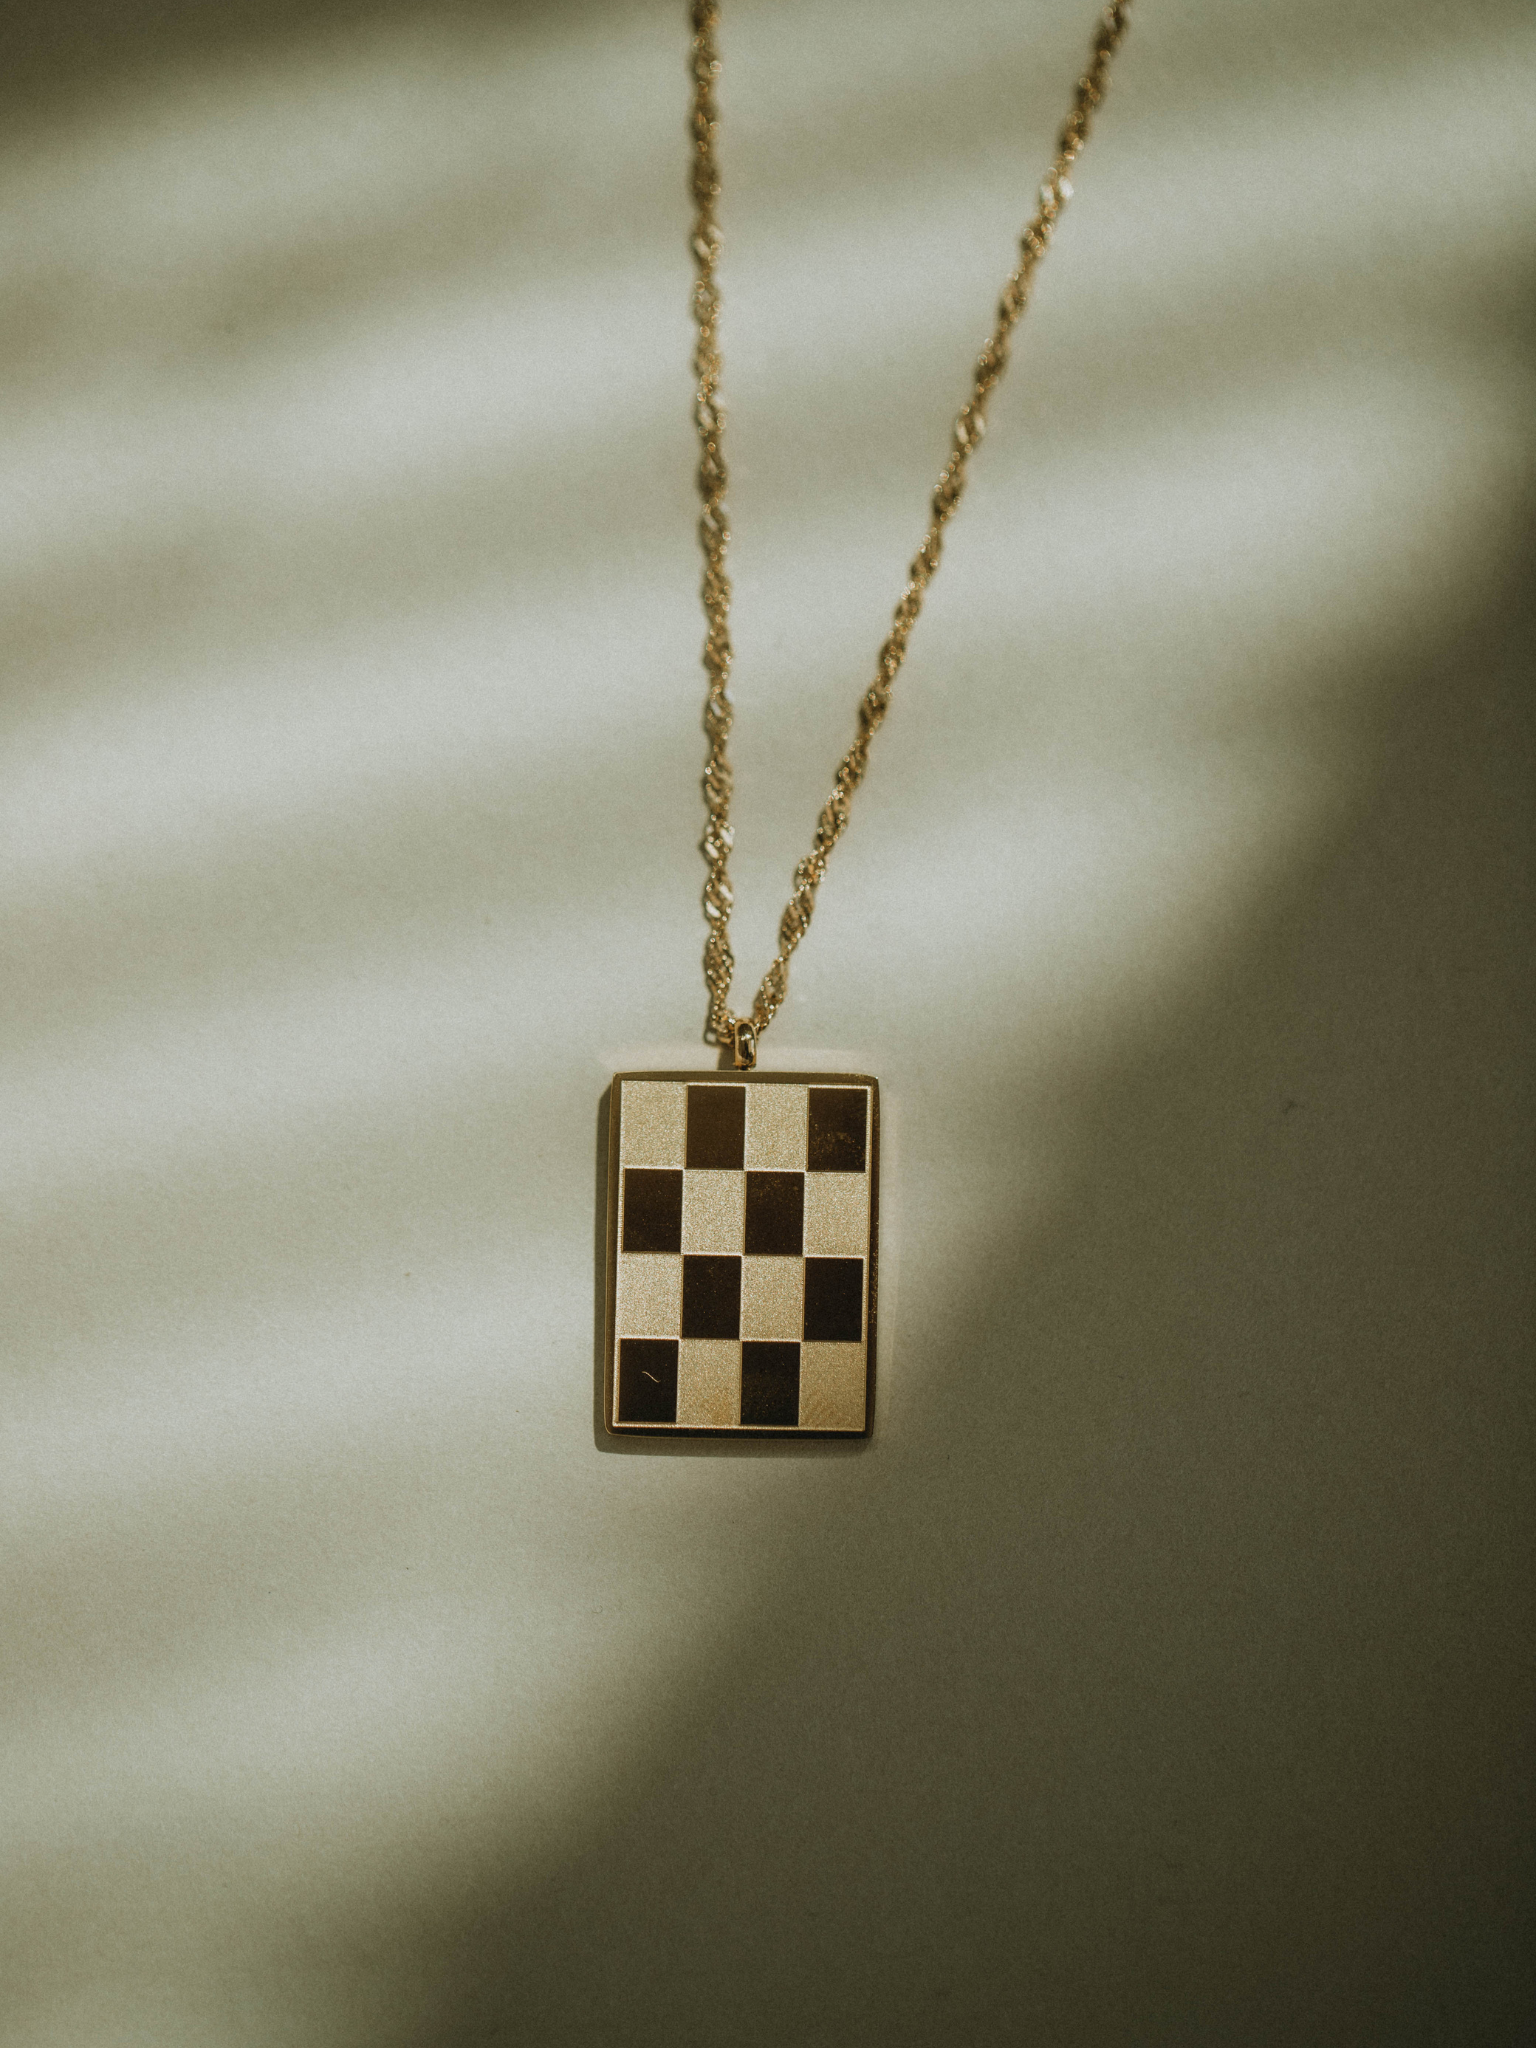 Checkmate Necklace 18k Gold Plated